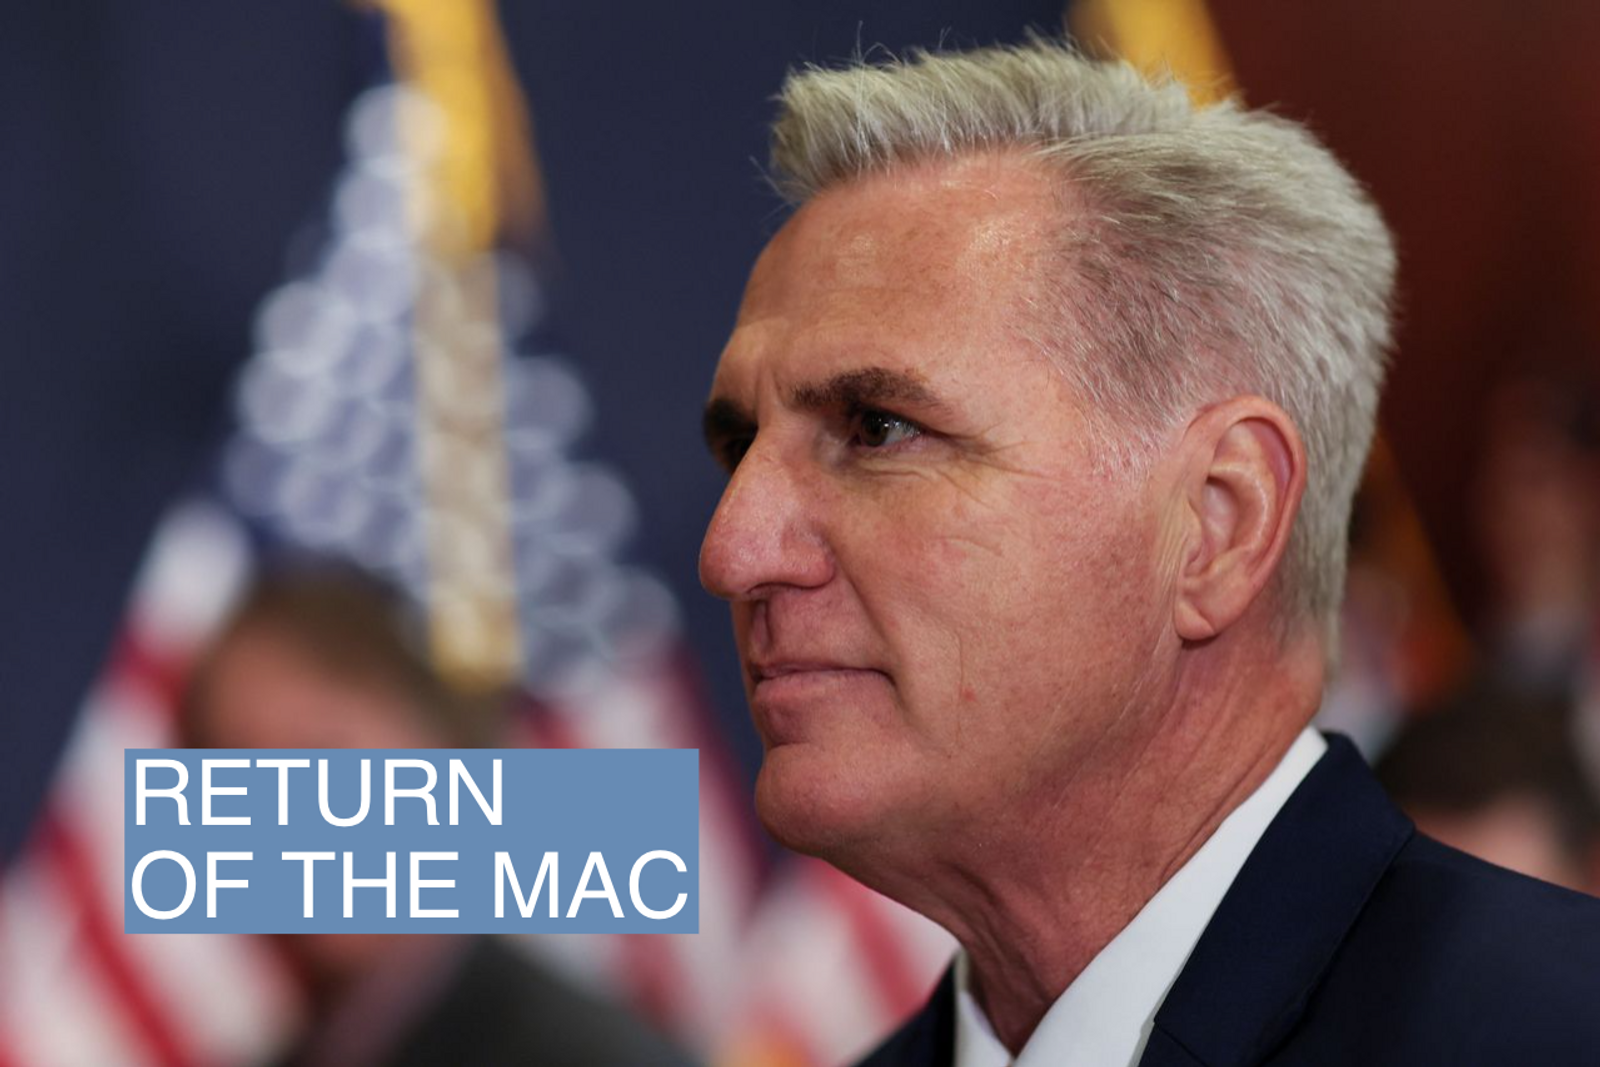 U.S. House Minority Leader Kevin McCarthy (R-CA) arrives as U.S. House Republicans gather for leadership elections at the U.S. Capitol in Washington, U.S., November 15, 2022.